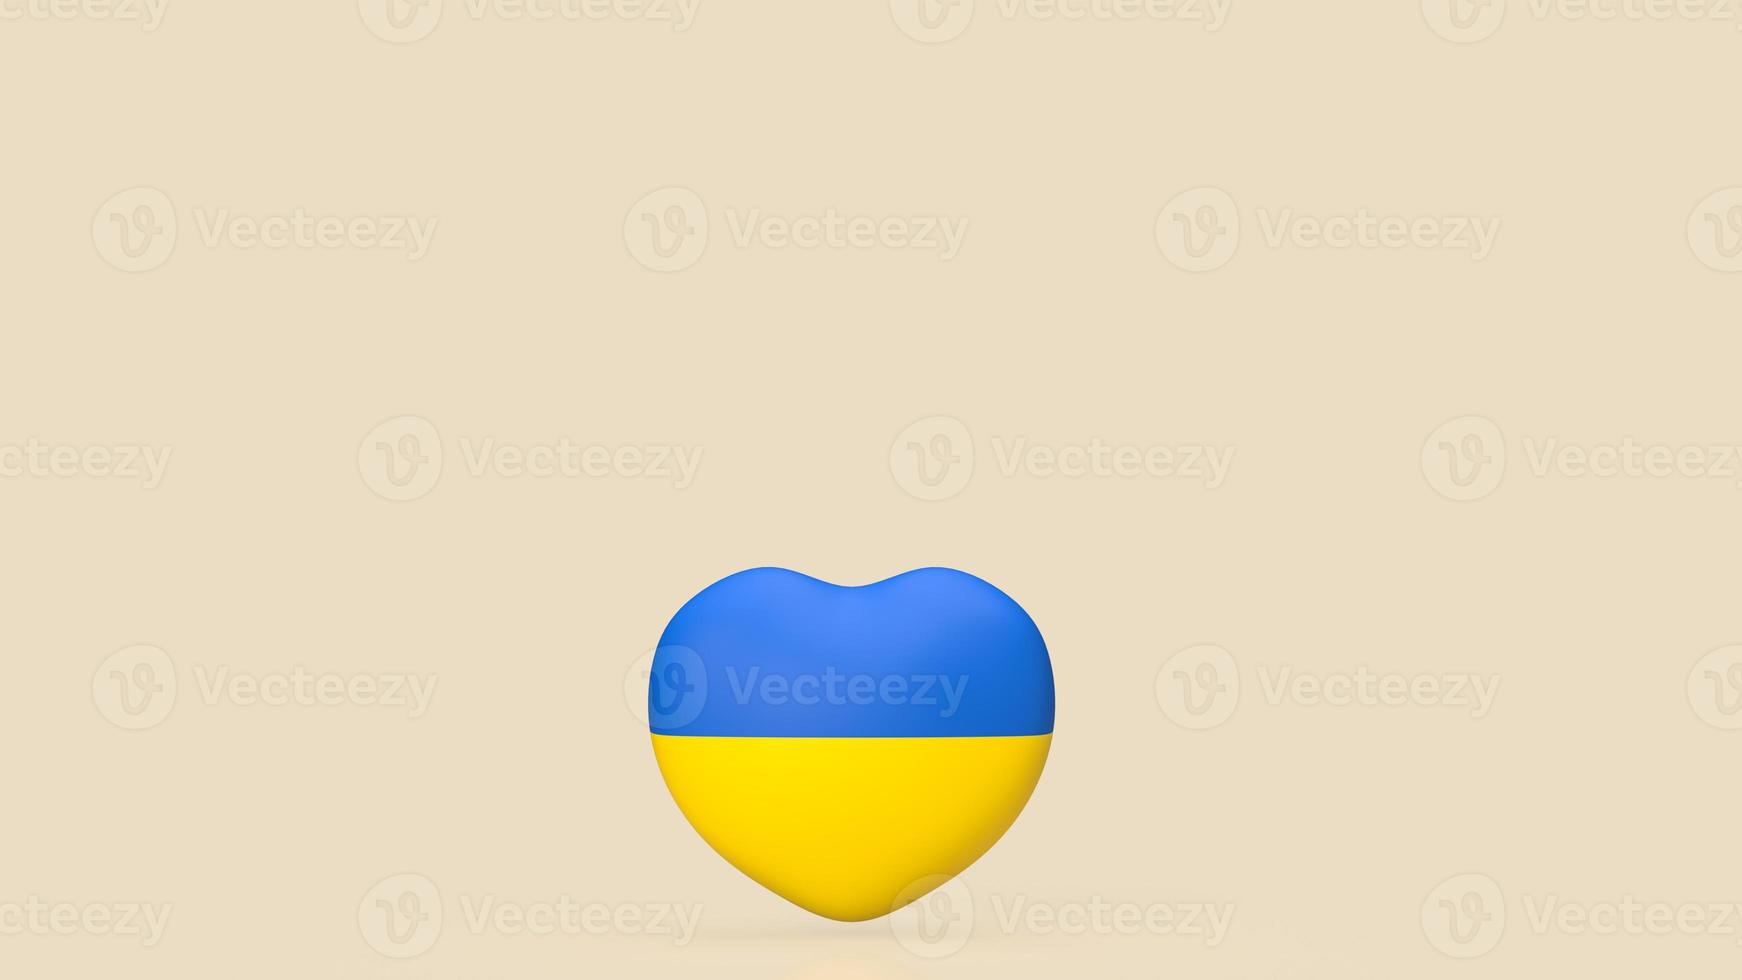 The 3d heart Pray For Ukraine peace and Save Ukraine from Russia photo